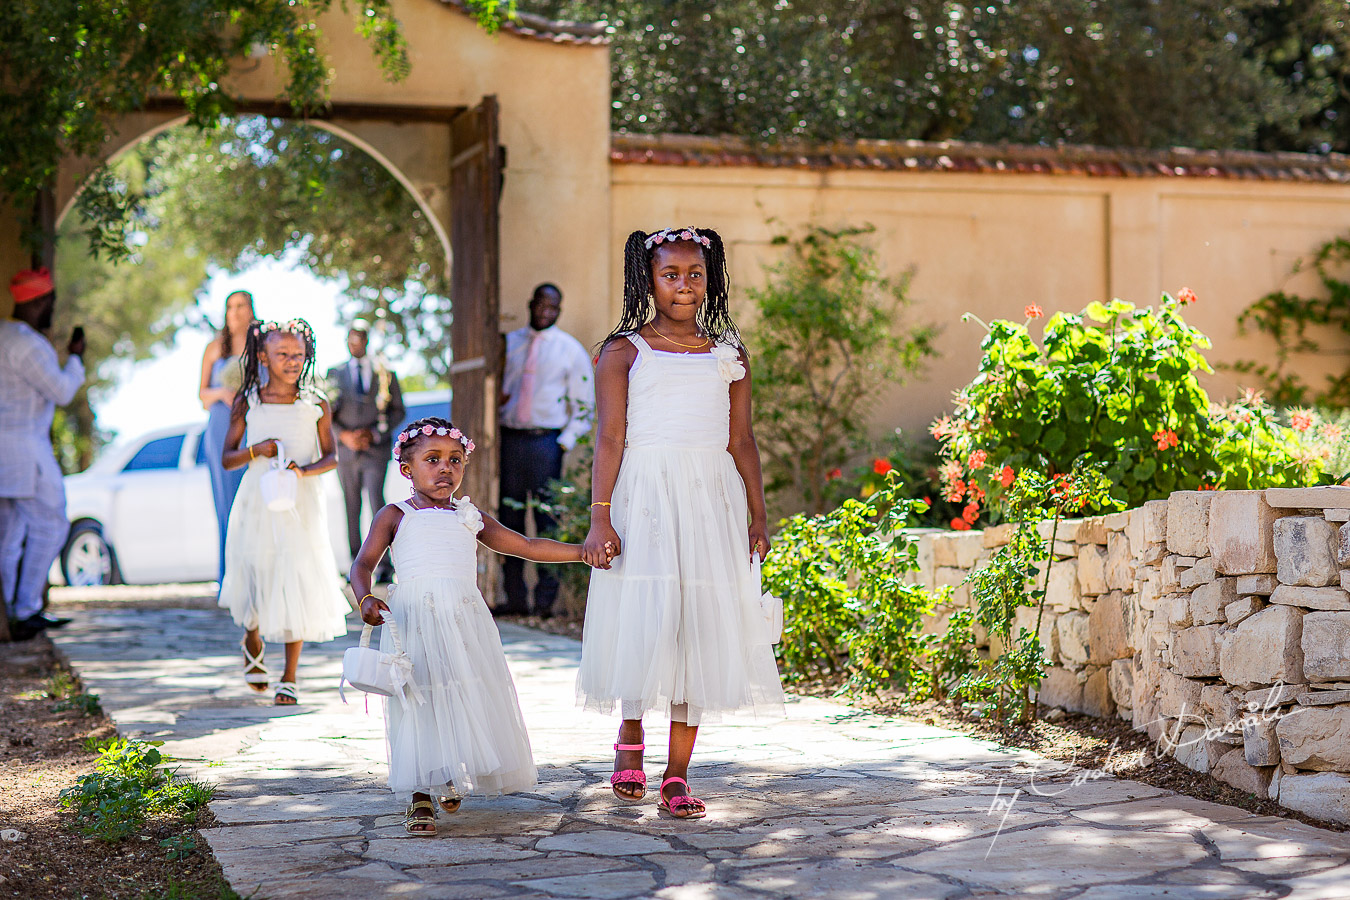 Moments with flower girls announcing the arrival of the bride captured a wedding at Minthis Hills in Cyprus, by Cristian Dascalu.